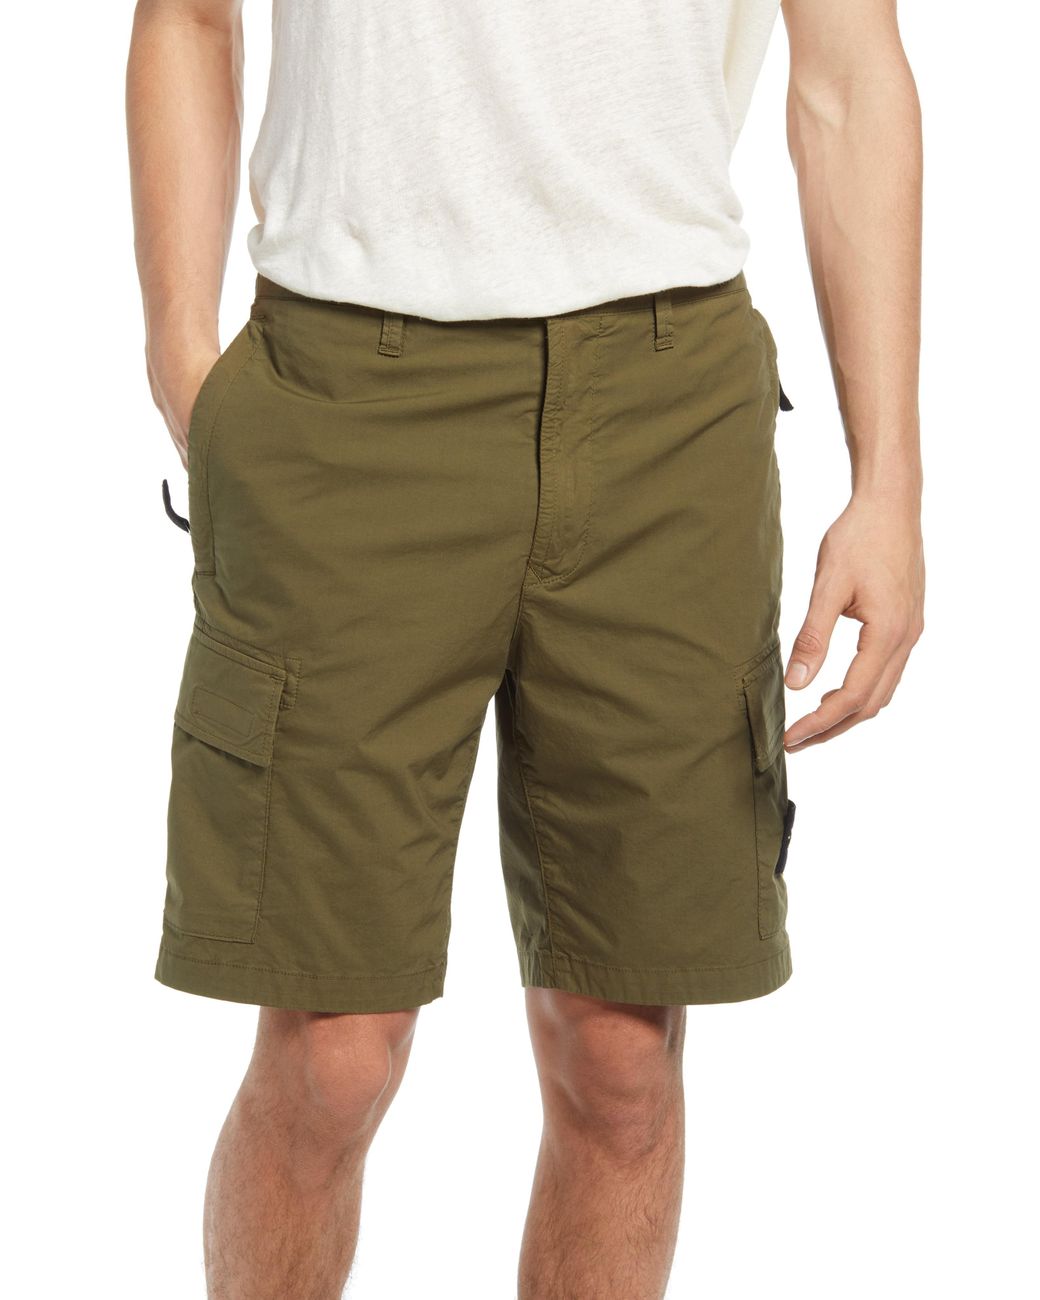 Stone Island Cotton Bermuda Cargo Shorts in Olive (Green) for Men - Lyst